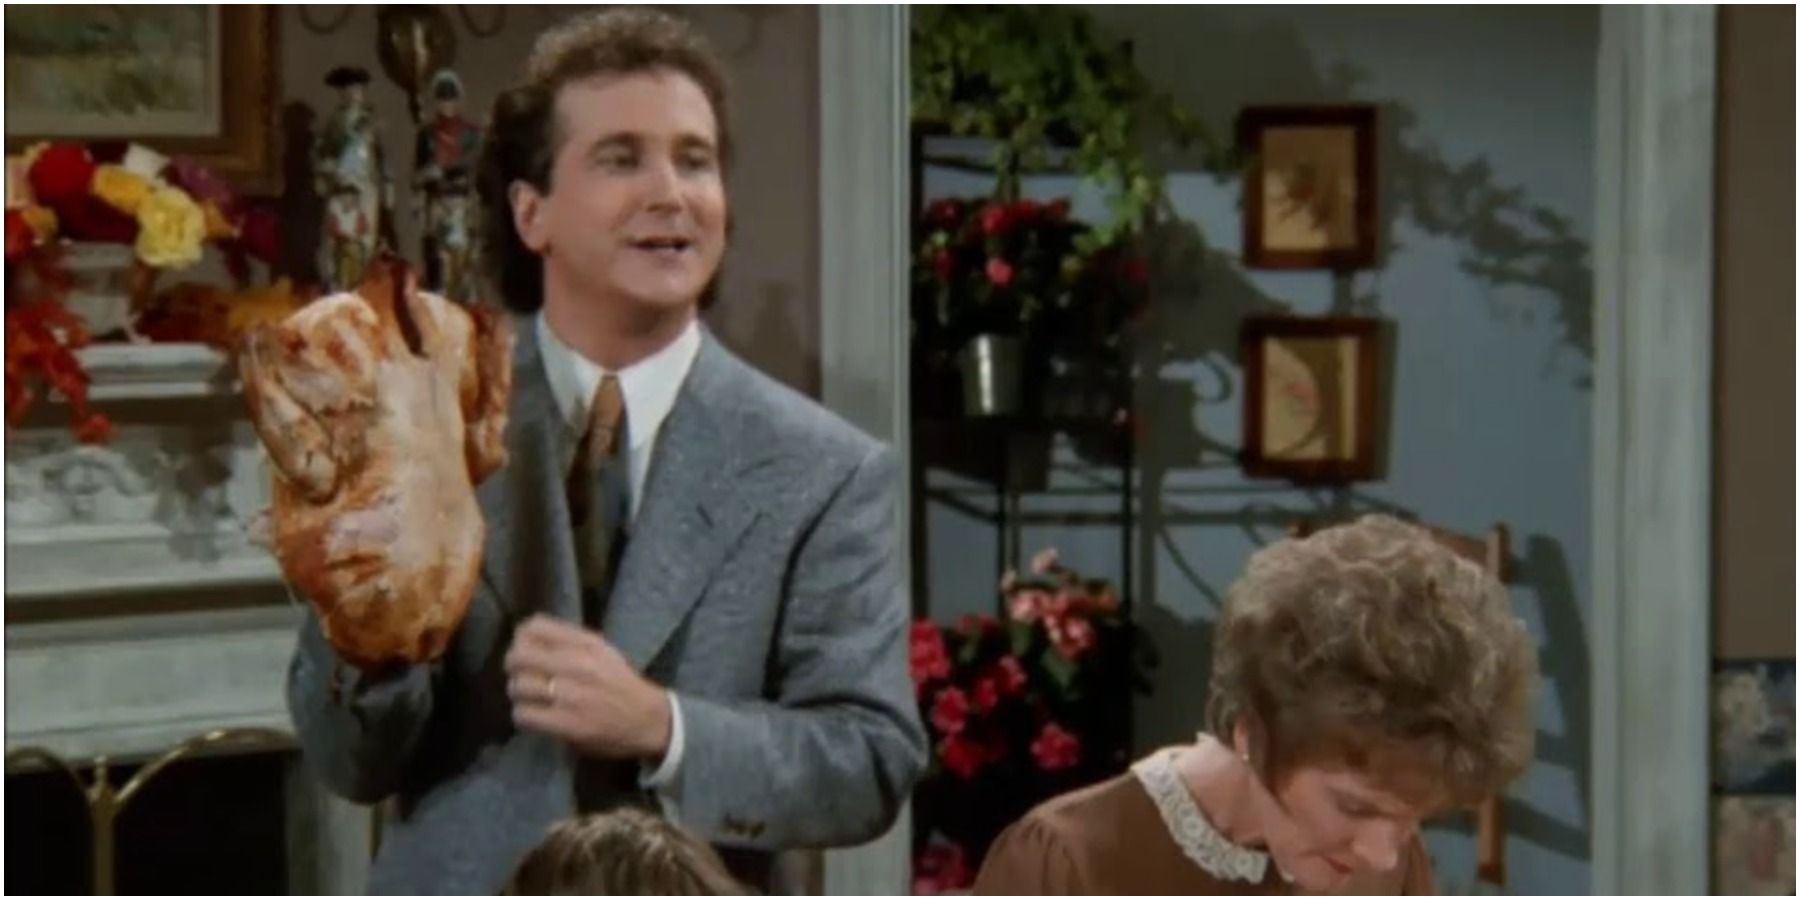 10 Classic Thanksgiving Sitcom Episodes To Stream On Netflix Or Hulu Ranked By IMDb